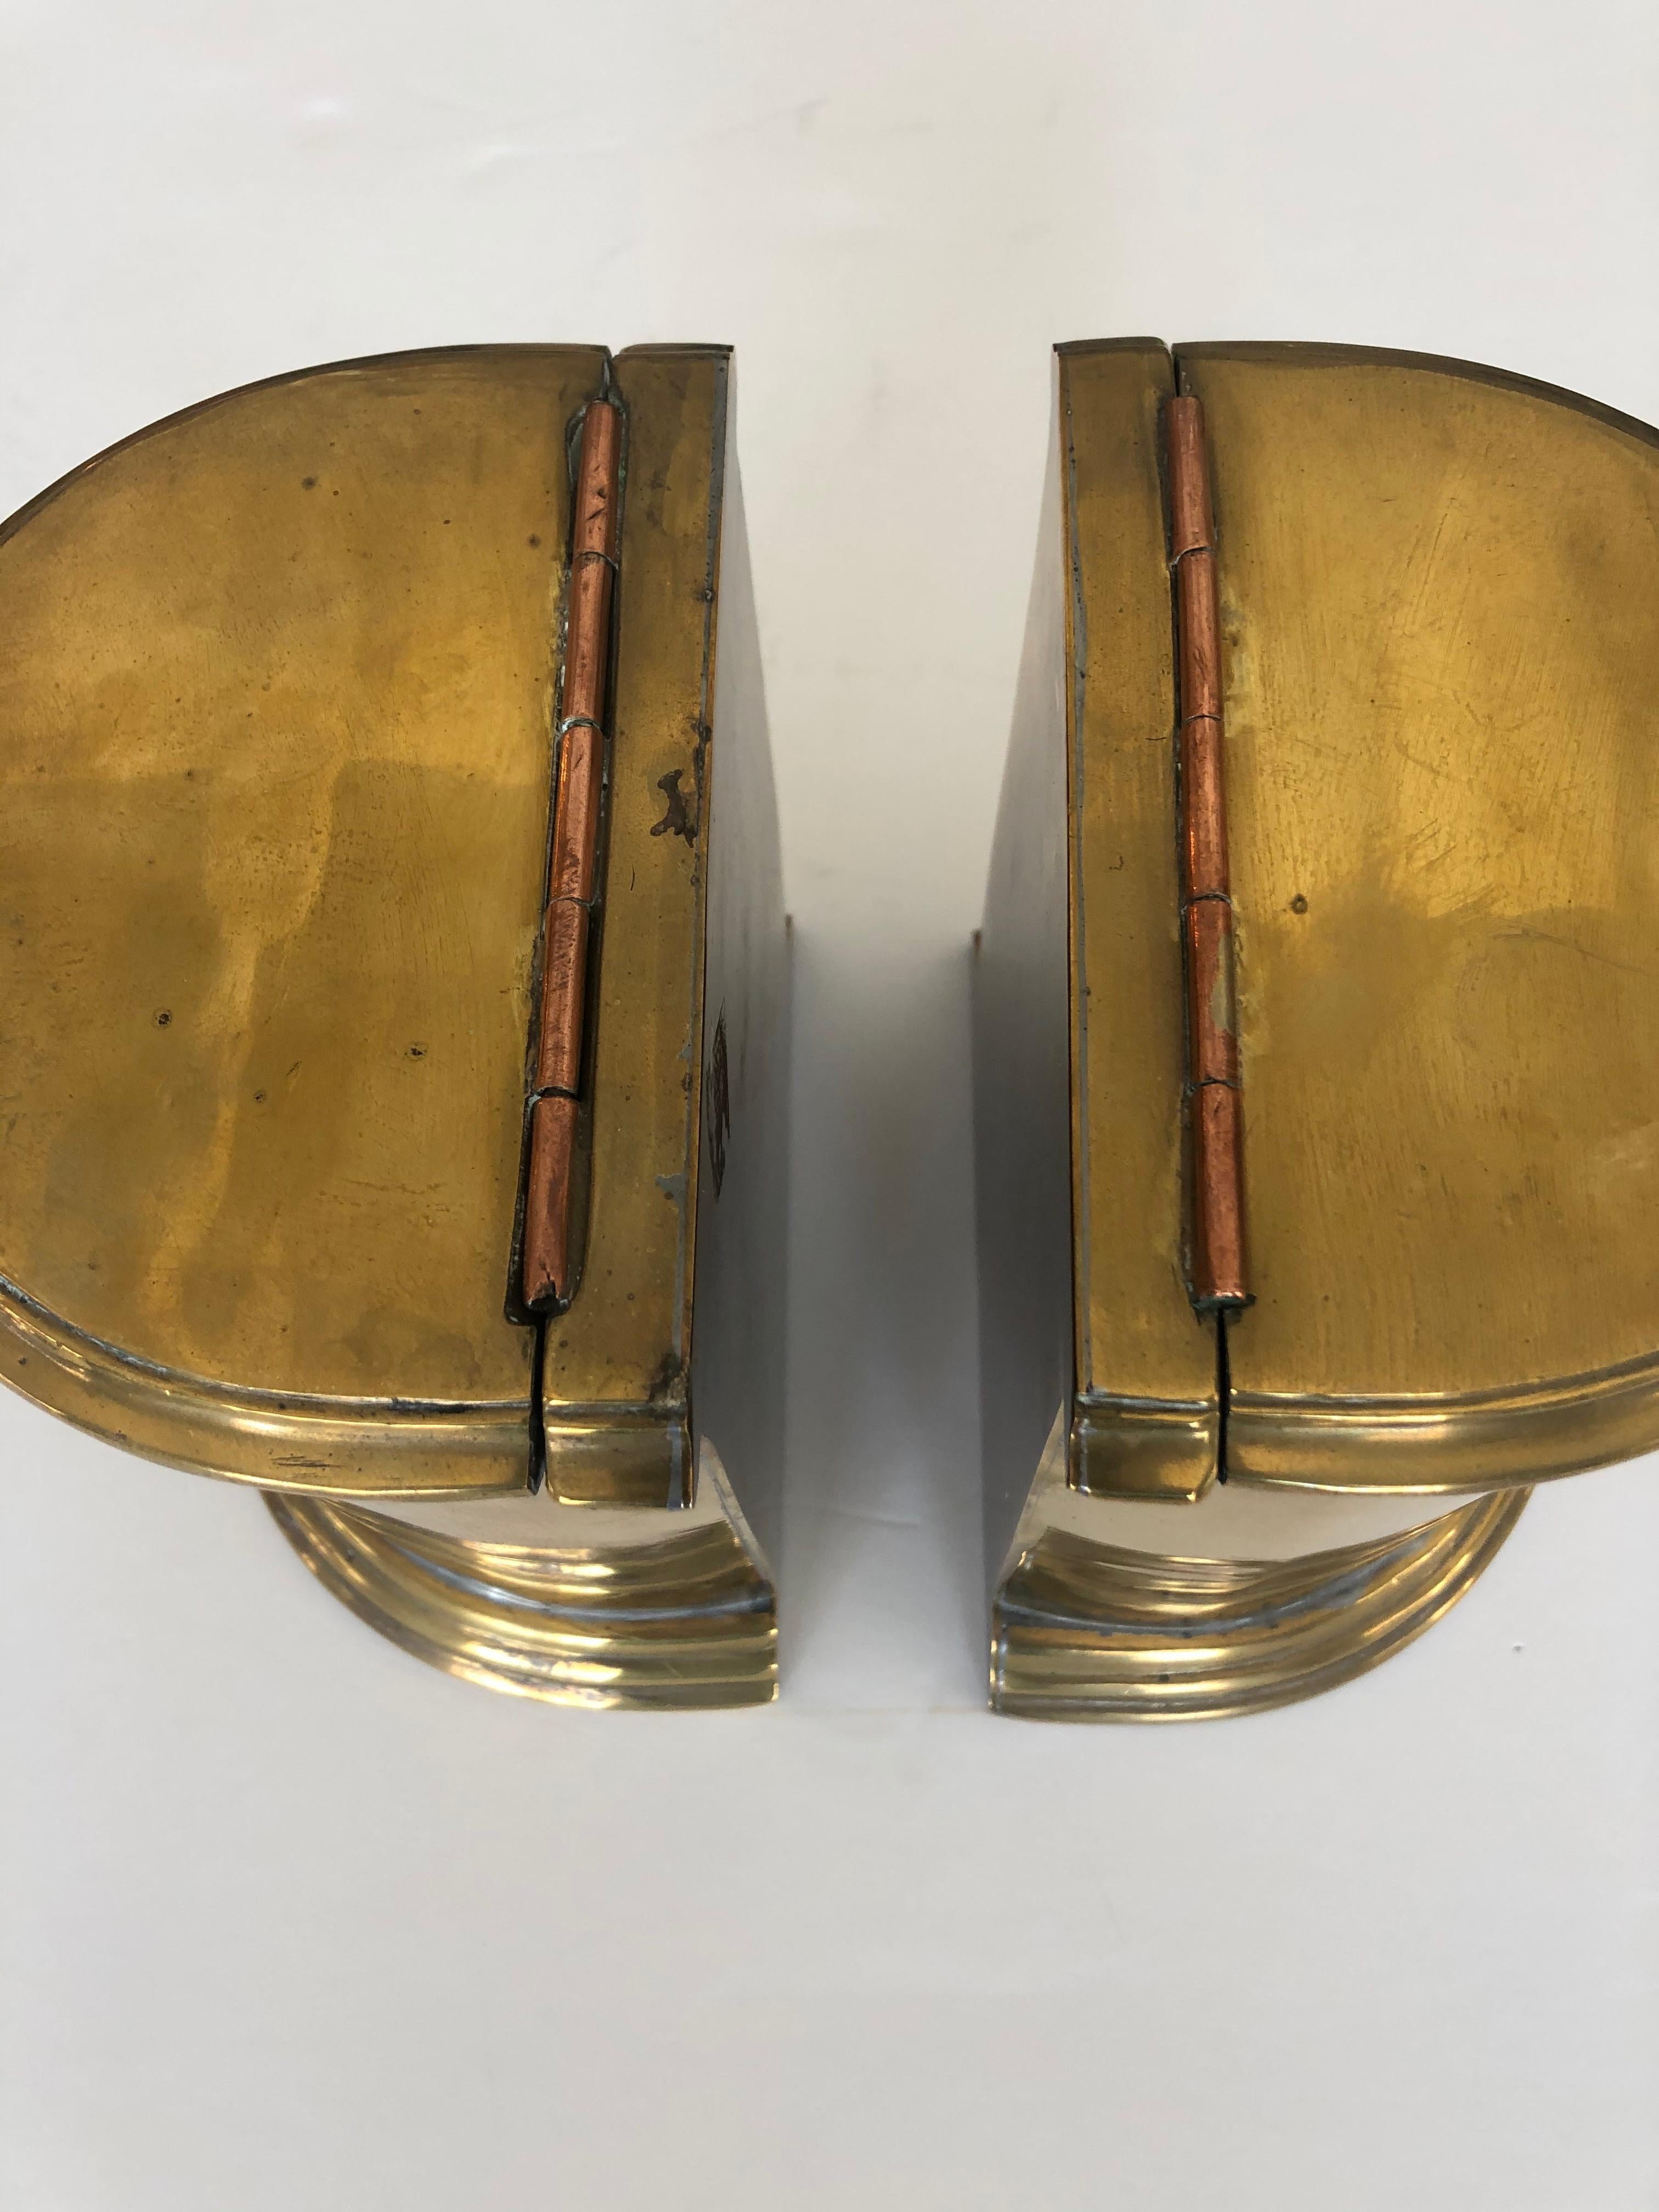 Stunning chunky pair of antique heavy cast brass English bookends having a cylindrical shape and lids that open for storage inside.